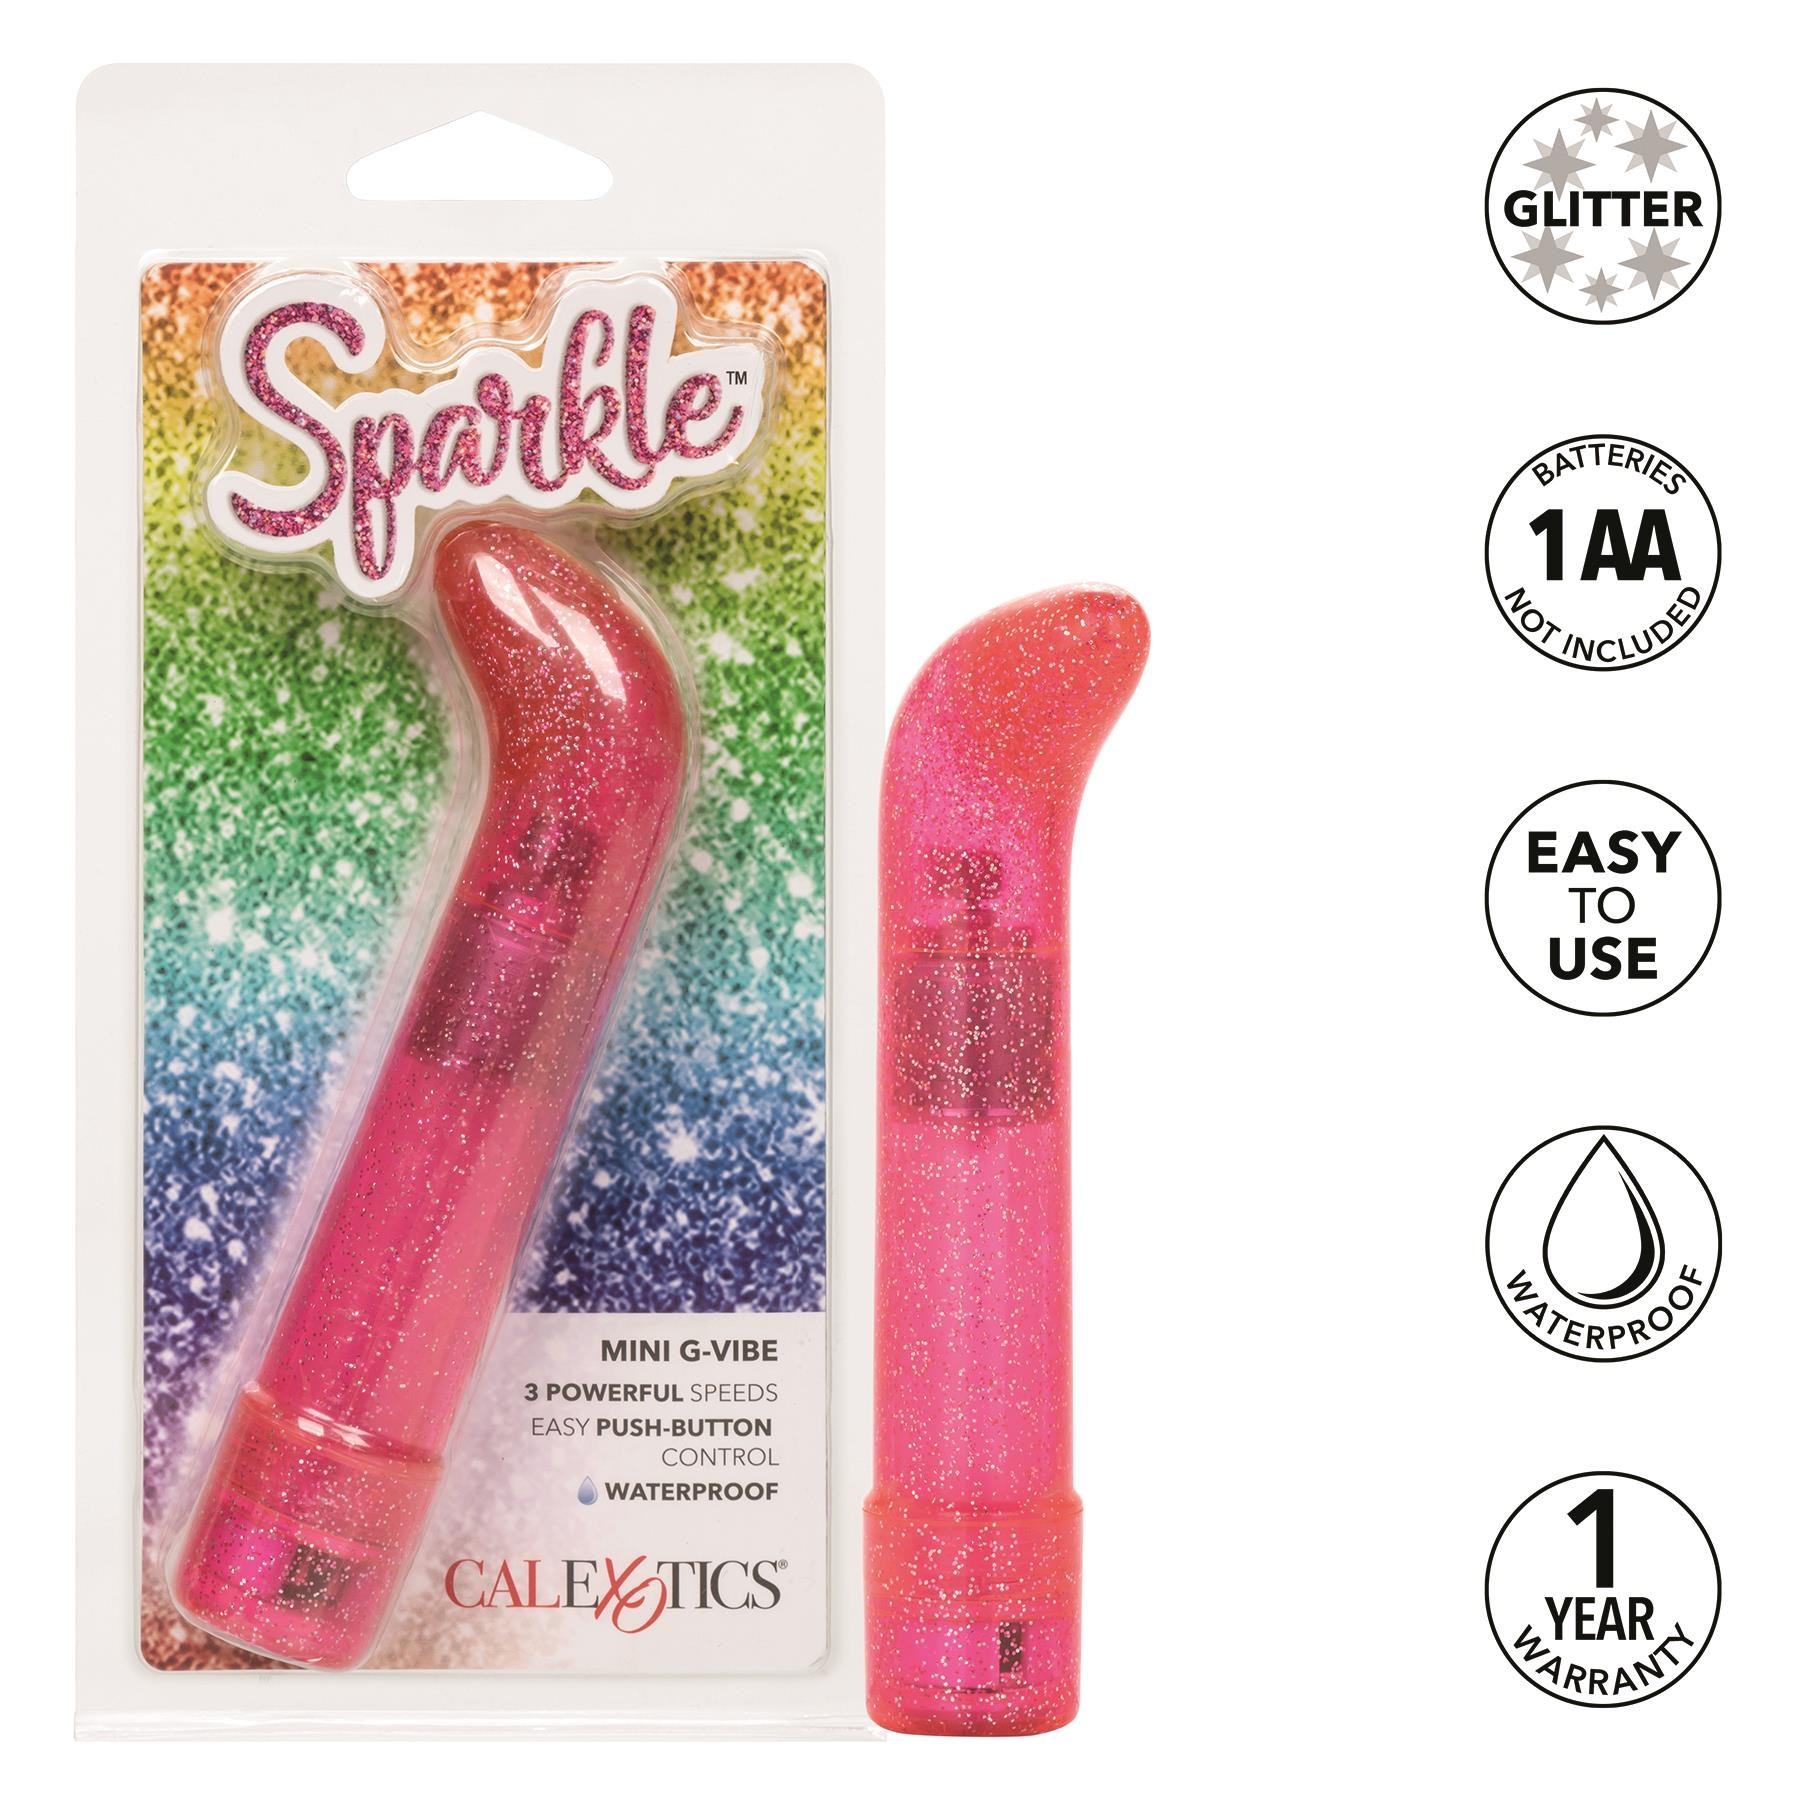 Sparkle Mini G-Spot Vibrator - Product, Packaging, and Features